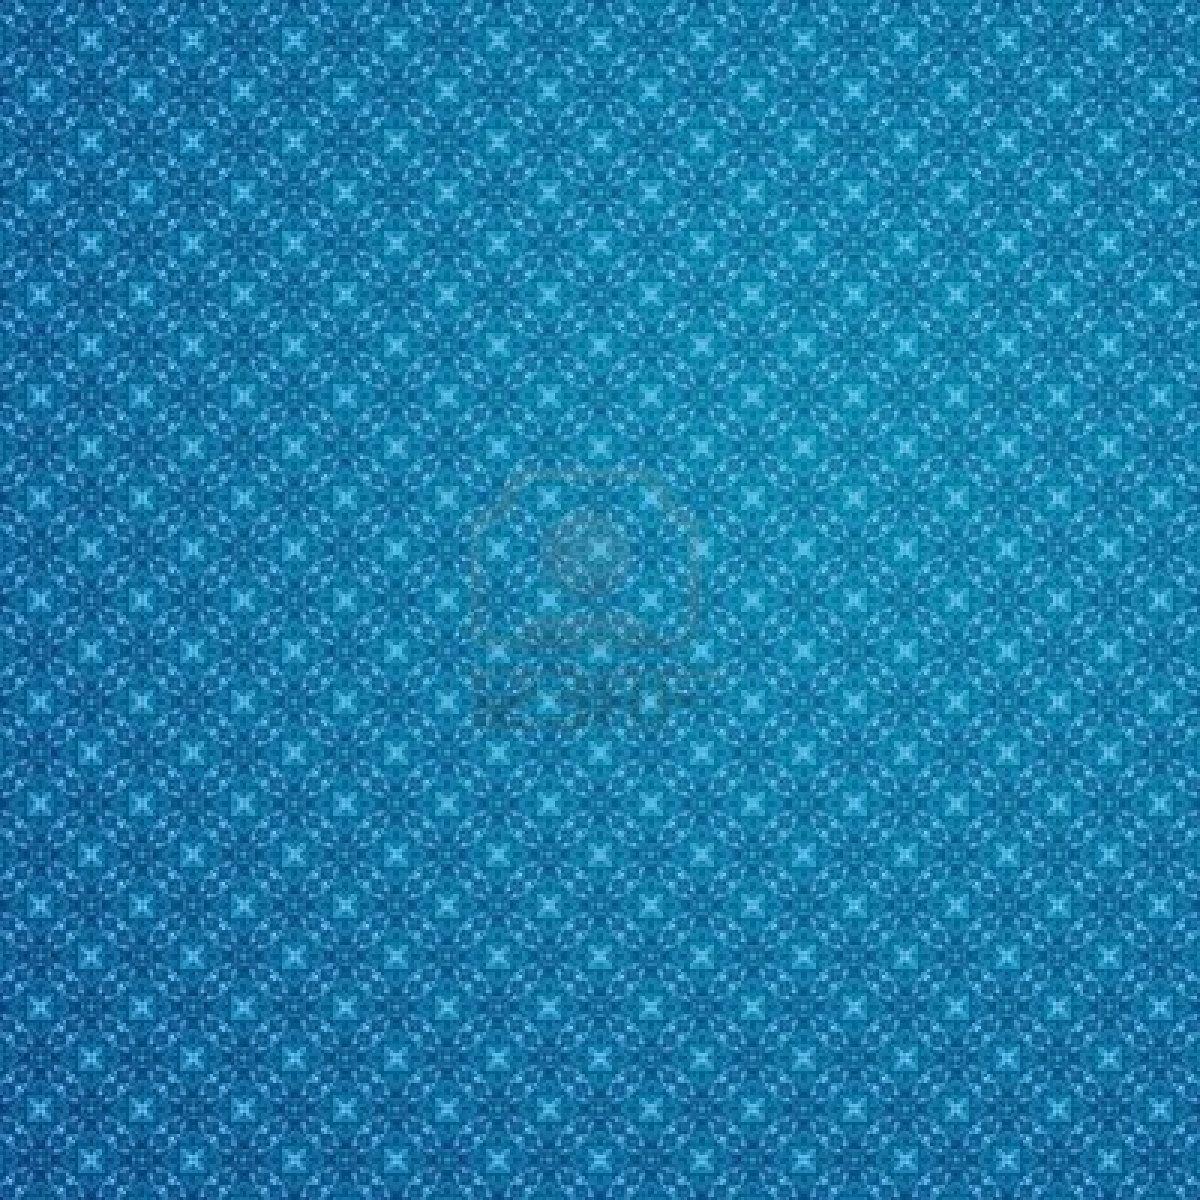 An Image Of A Blue Vintage Wallpaper Background Royalty Free Stock